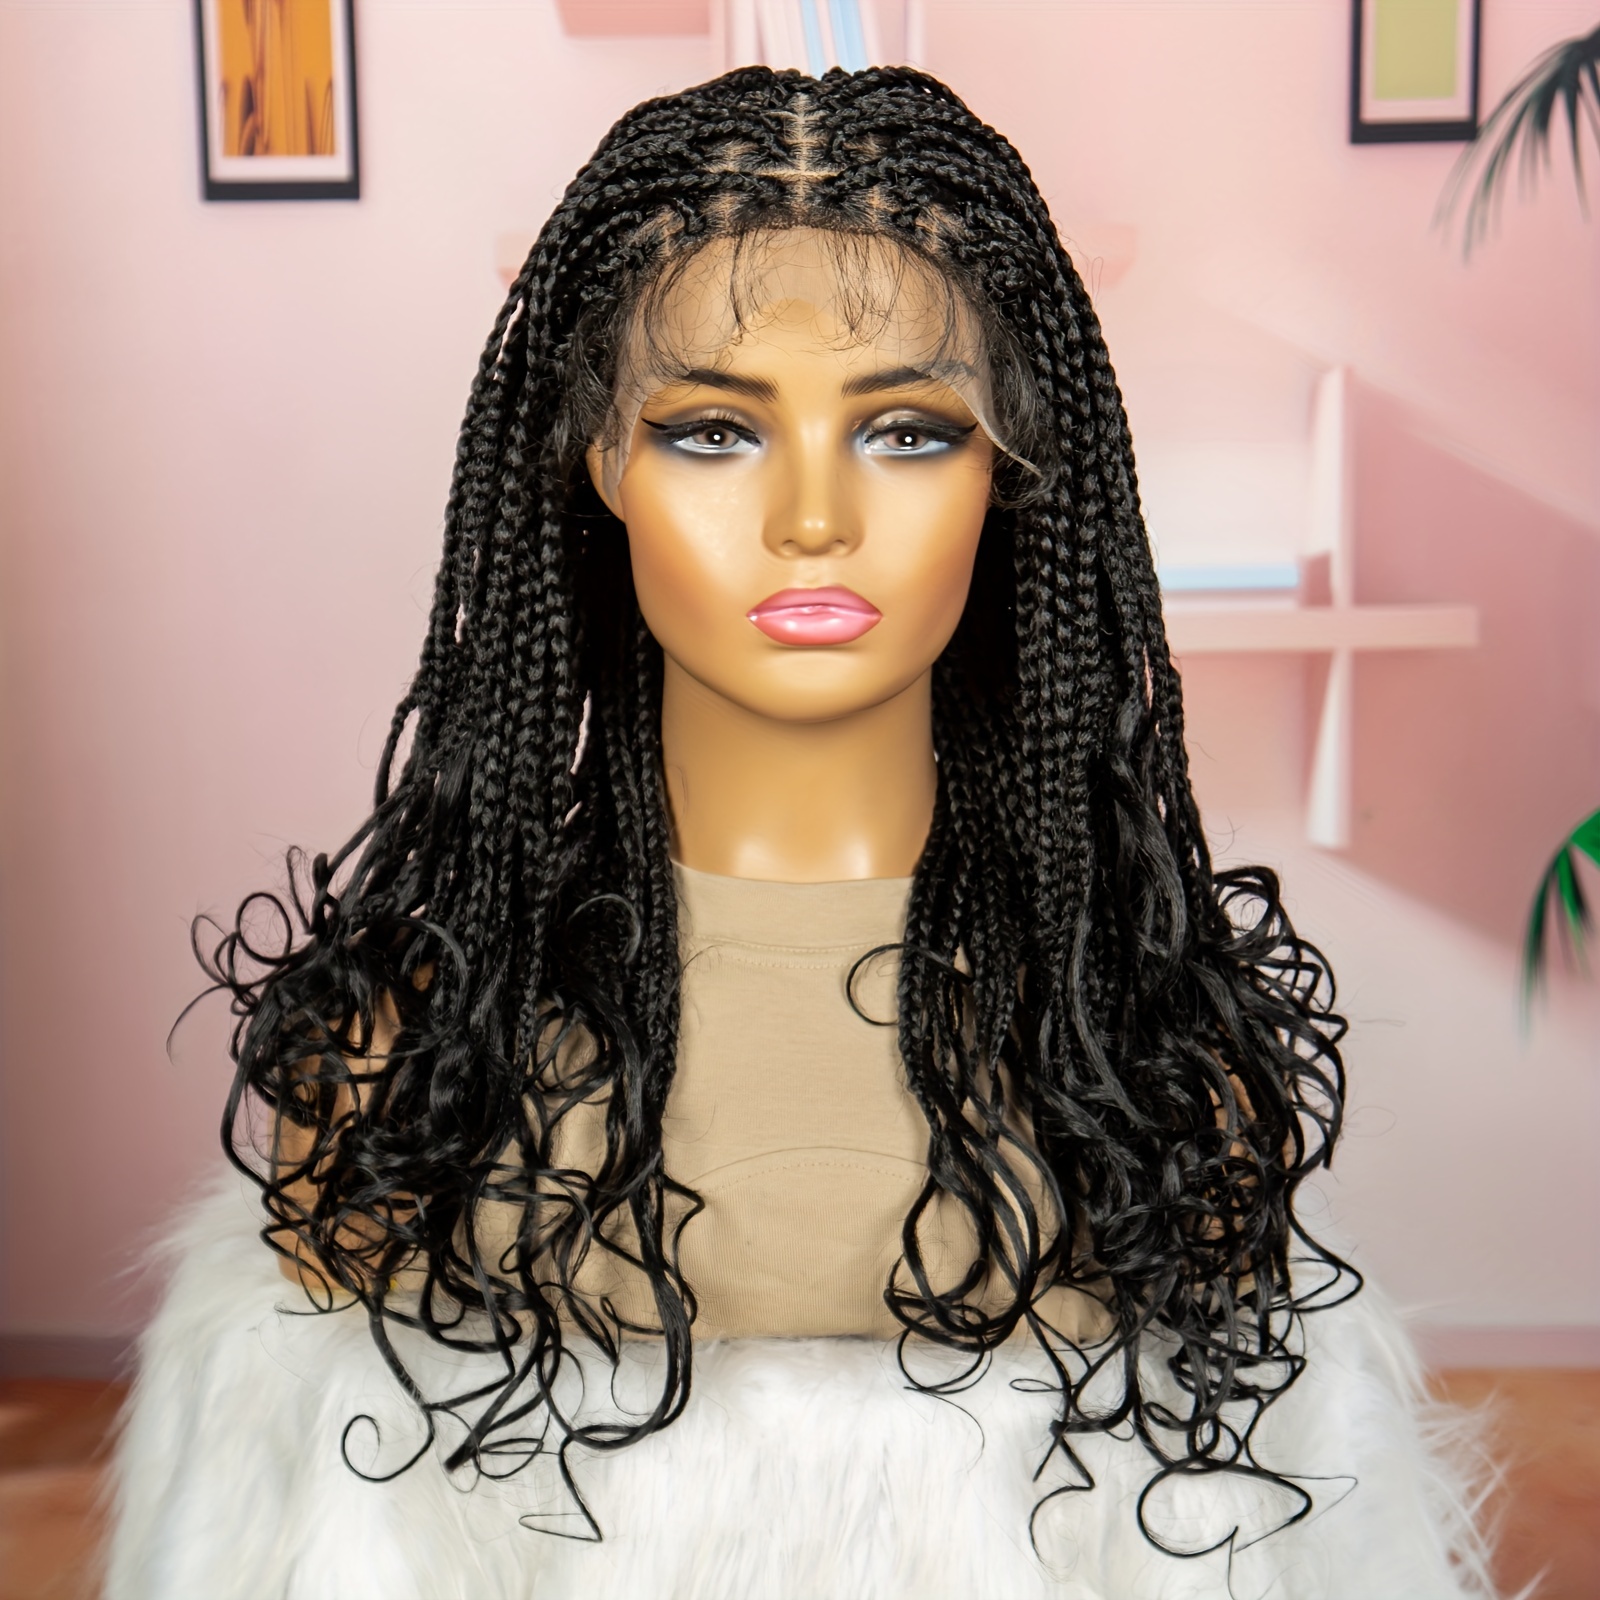 Curly Faux Locs Synthetic Braided Wigs Black Women Ombre Brown